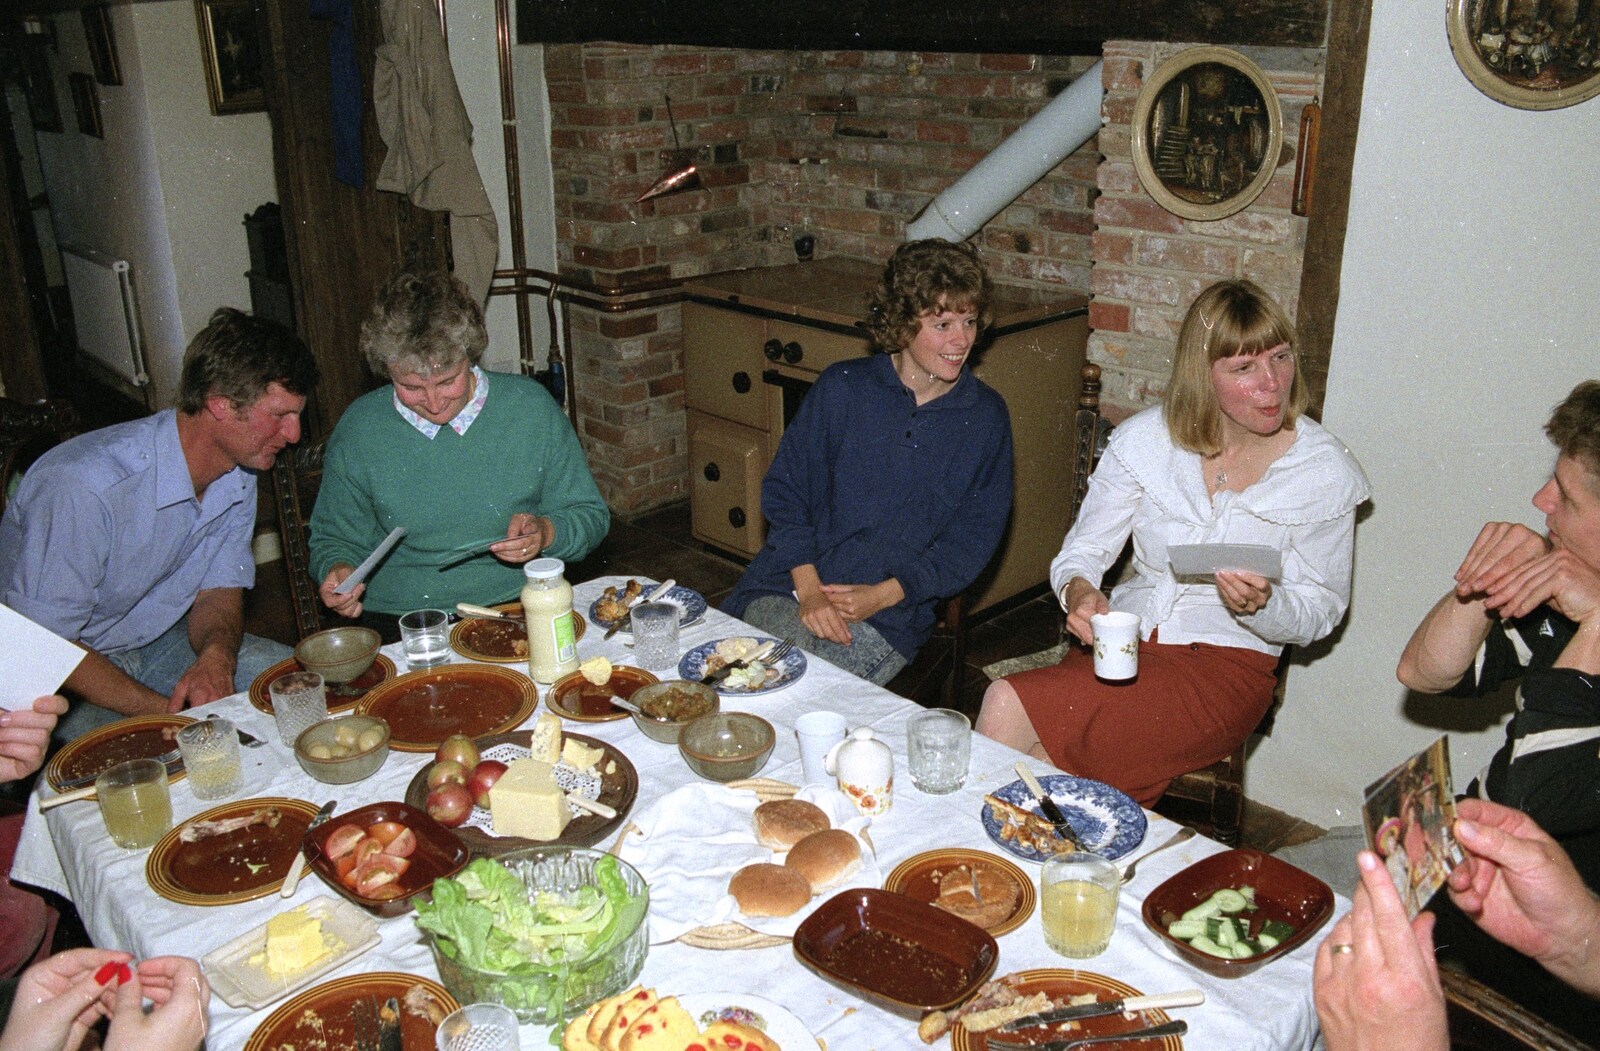 Some of Nosher's photos are passed around from The Annual Cider Making Event, Stuston, Suffolk - 11th October 1990